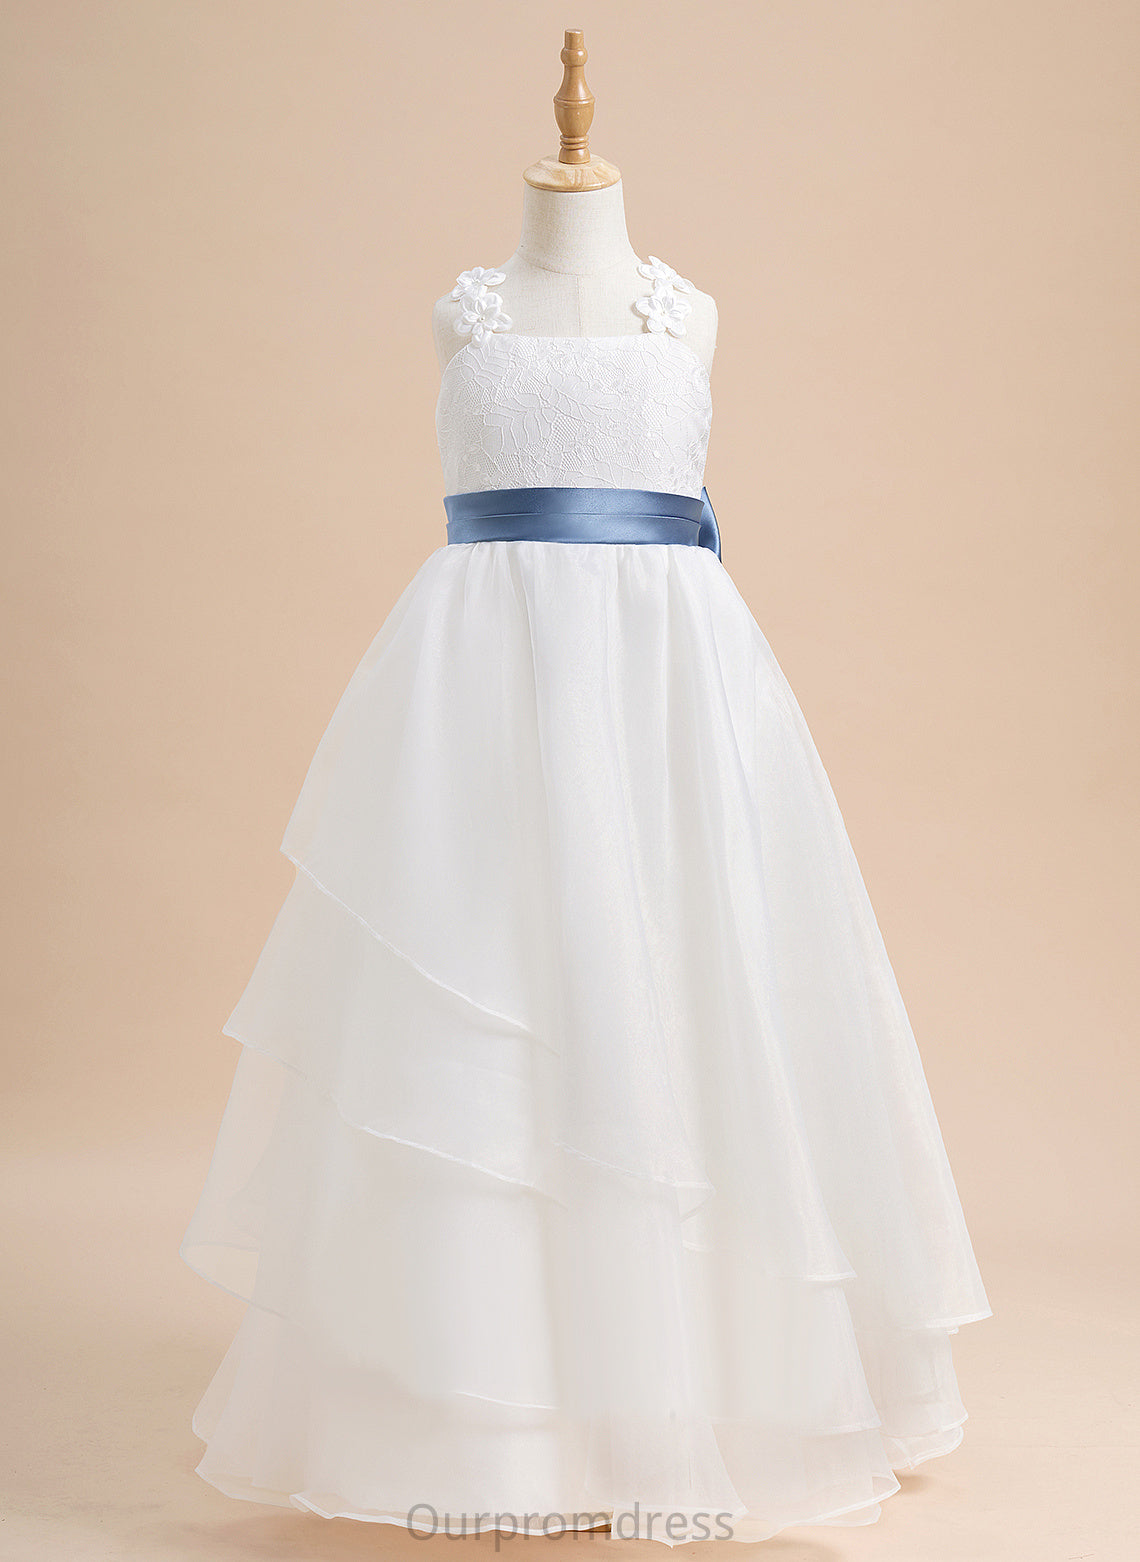 - Neckline Flower With Floor-length Ball-Gown/Princess Dress Square Lace/Sash/Beading/Flower(s)/Bow(s) Organza Sleeveless Flower Girl Dresses Chasity Girl